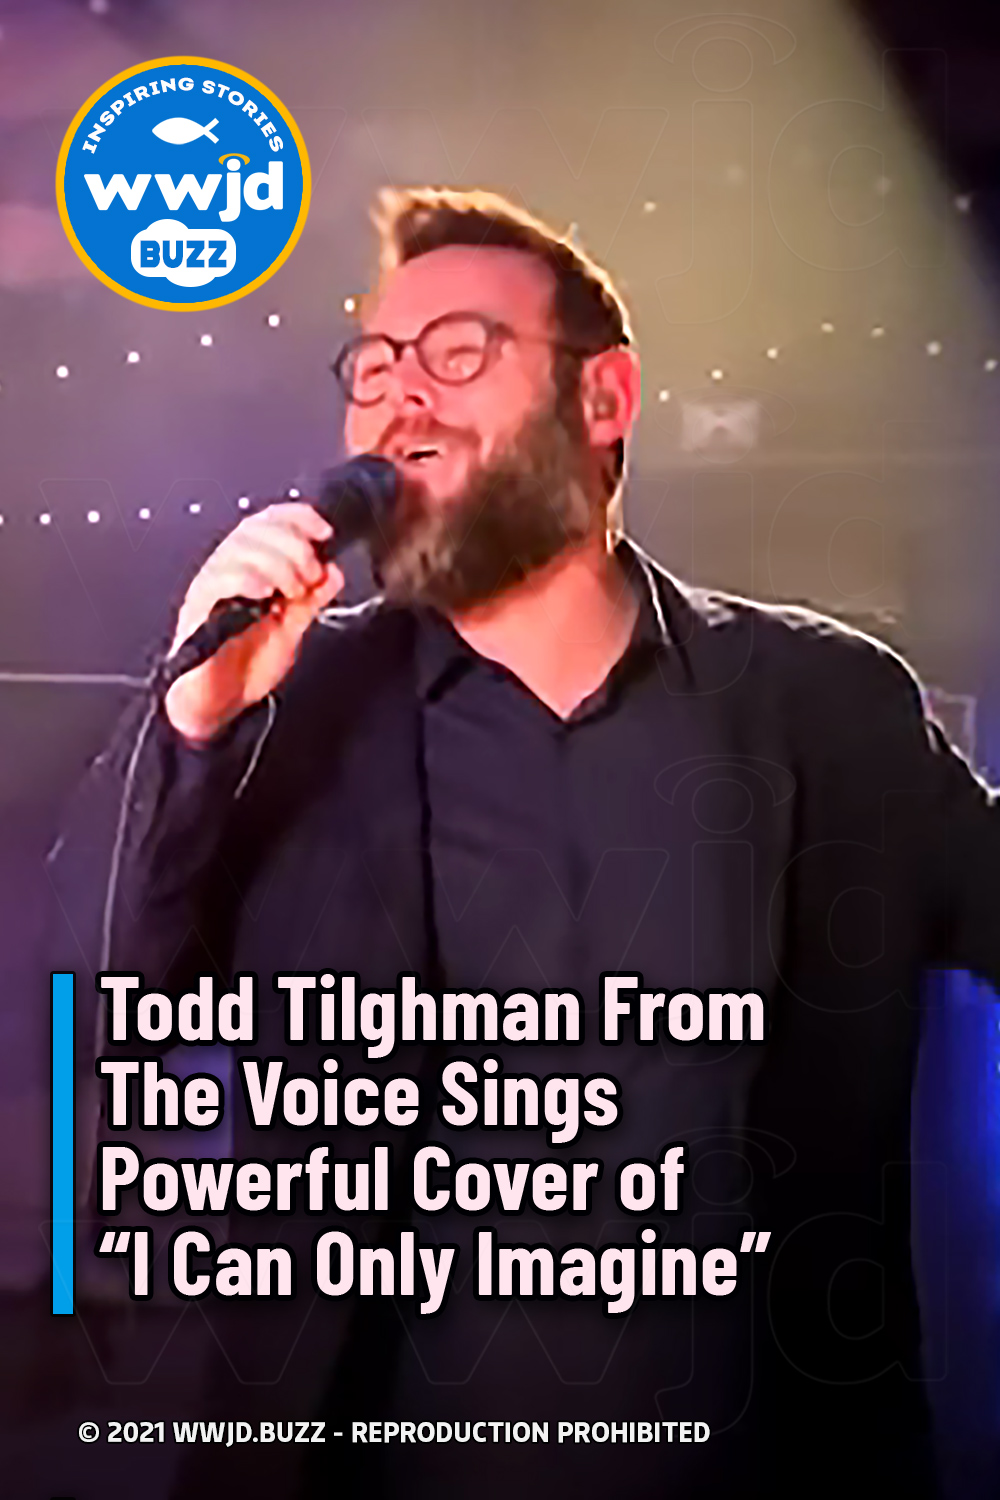 Todd Tilghman From The Voice Sings Powerful Cover of “I Can Only Imagine”